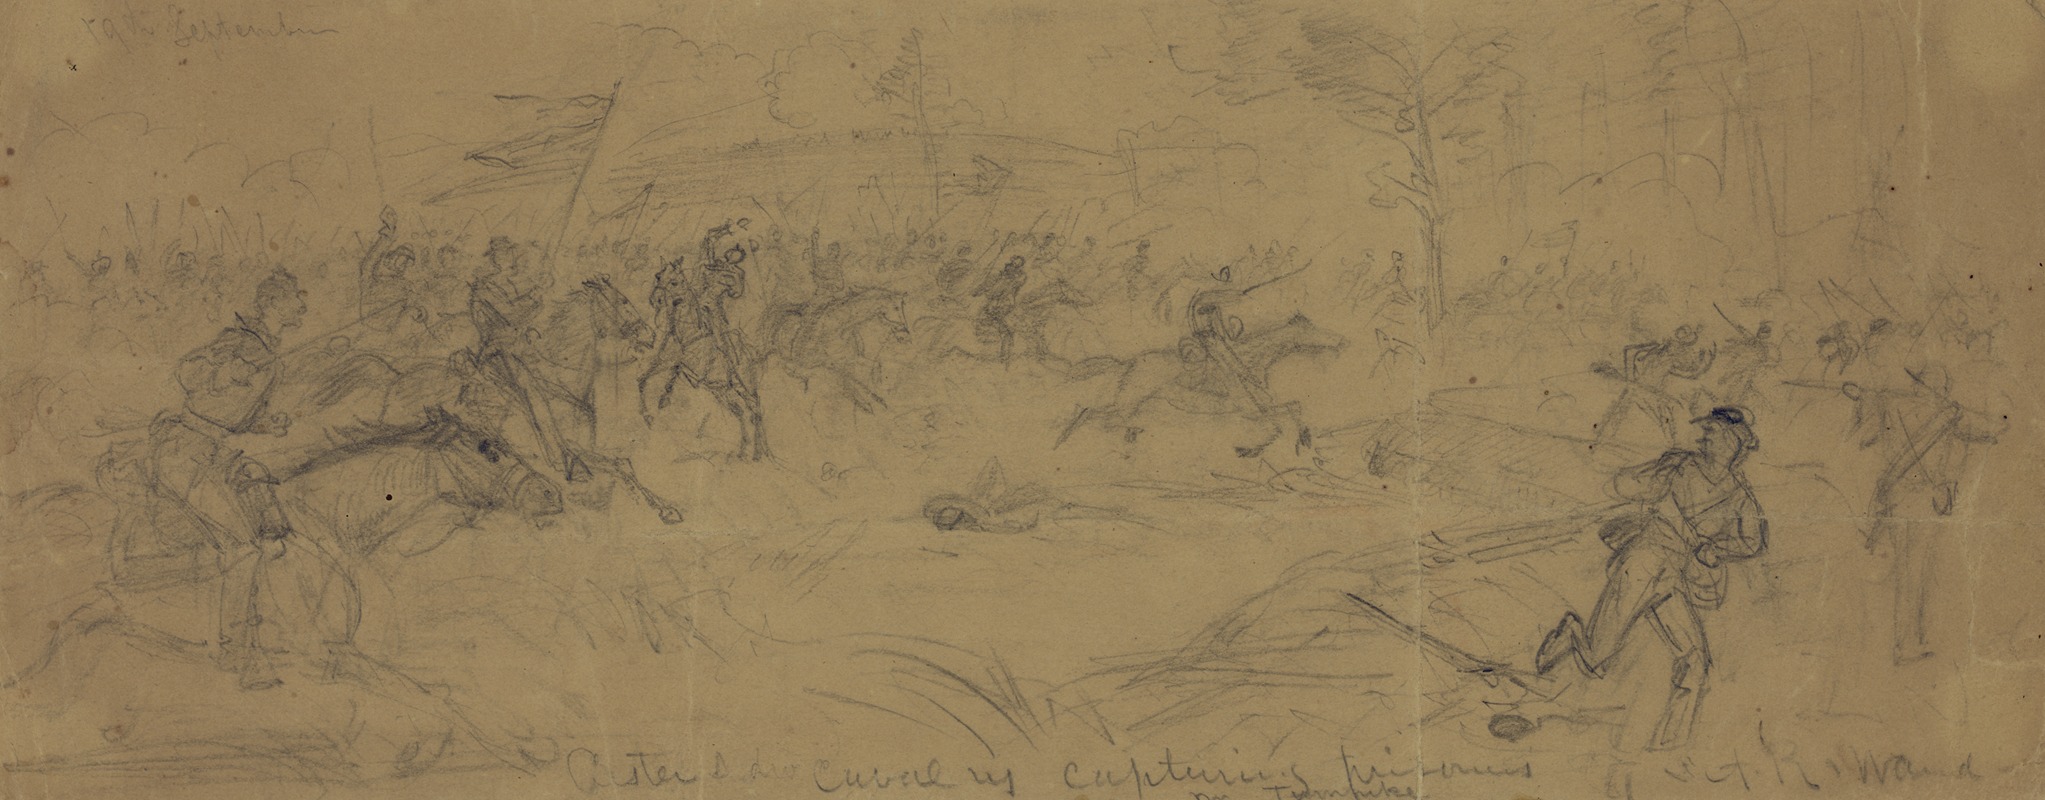 Alfred Rudolph Waud - Custer’s div. cavalry capturing prisoners nr. Turnpike